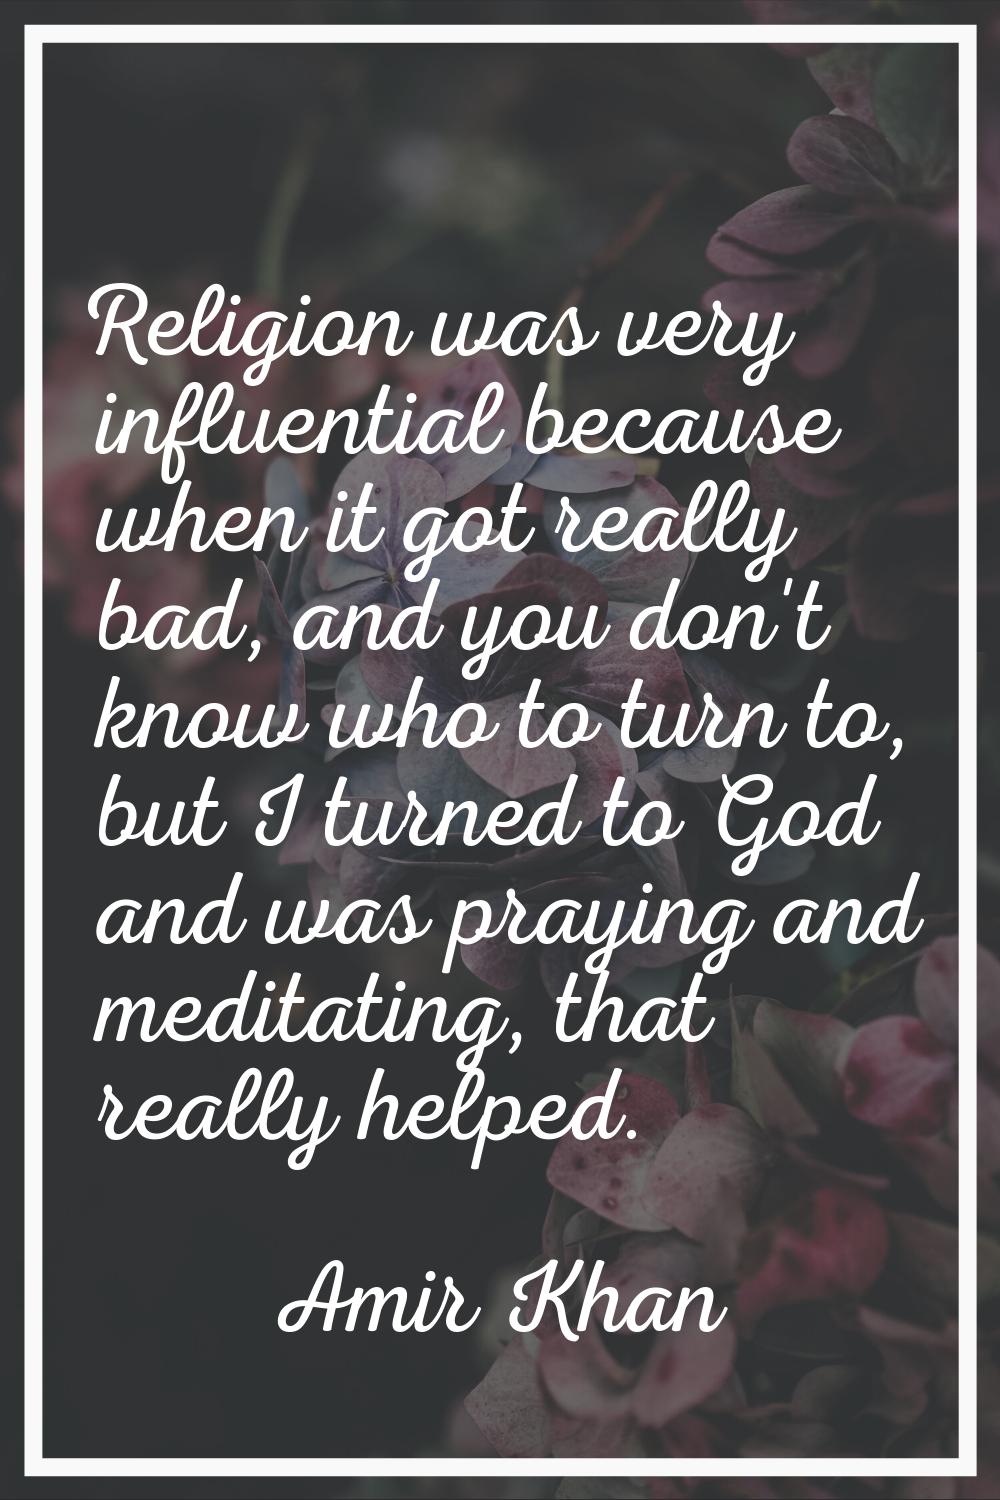 Religion was very influential because when it got really bad, and you don't know who to turn to, bu